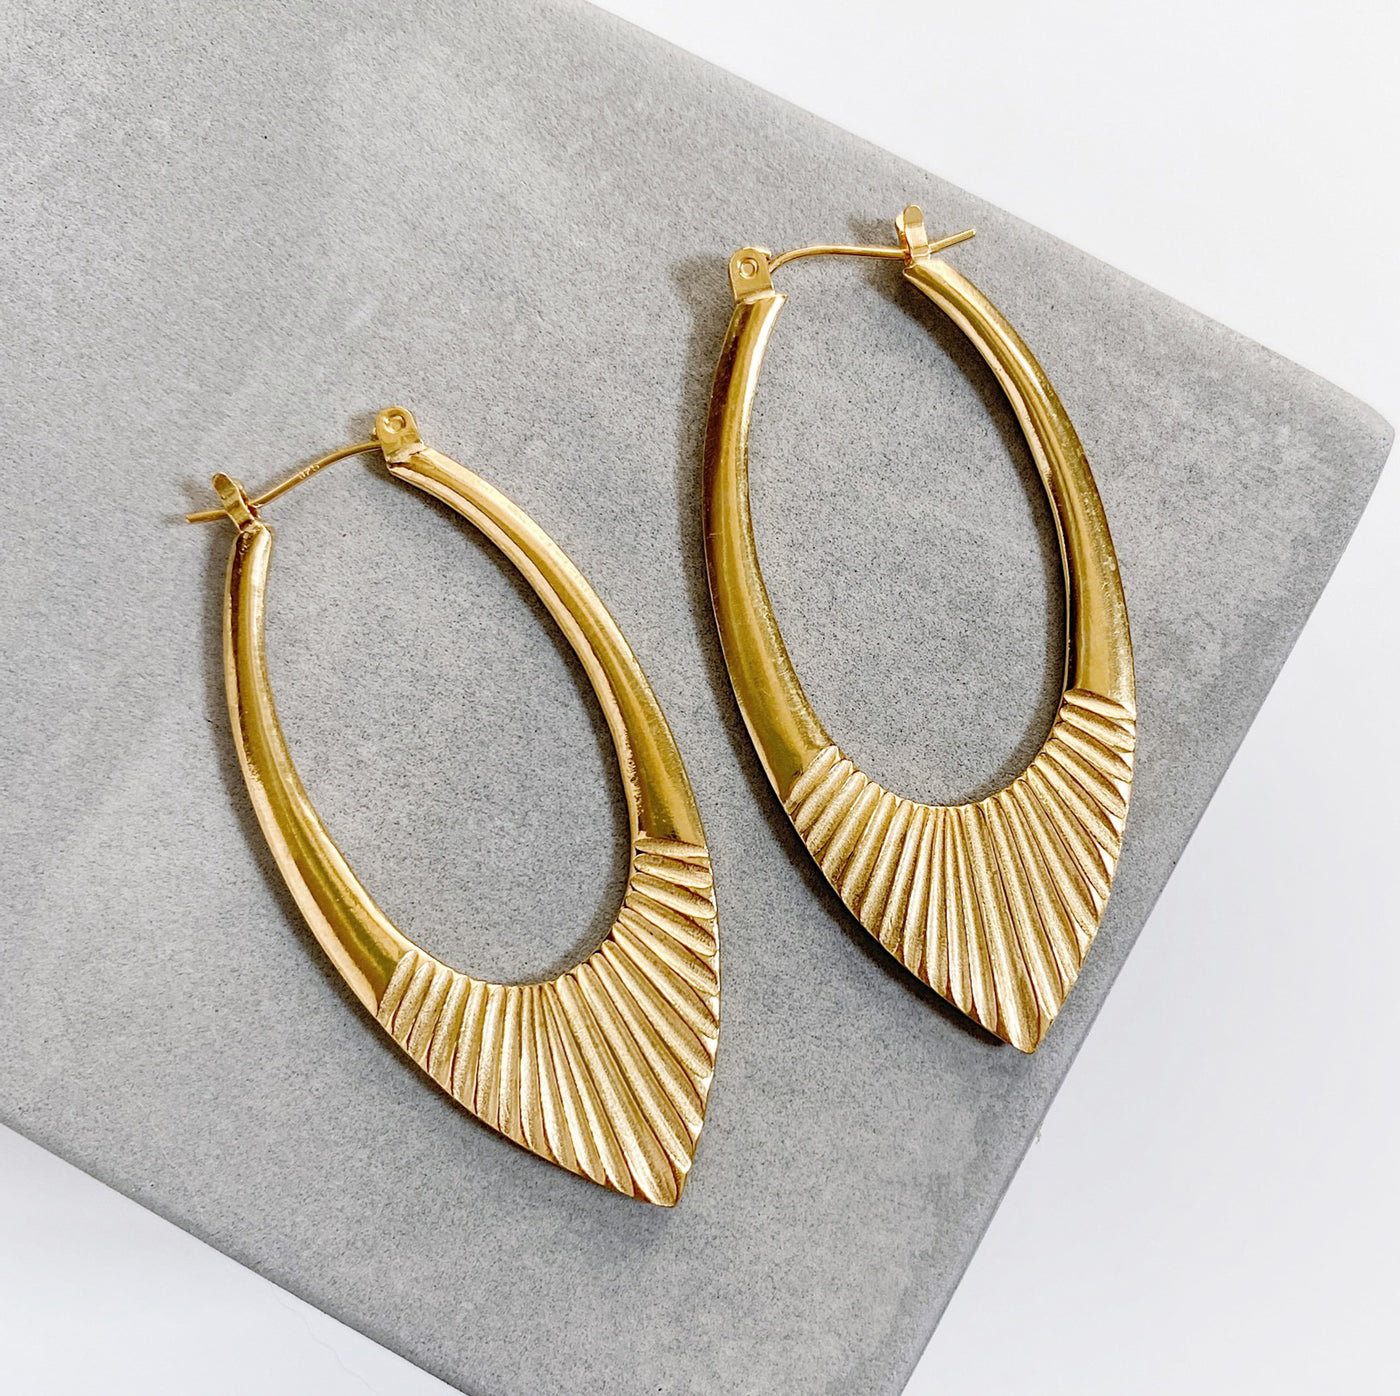 Gold Vermeil Large Oblong hoops with hinge closure and sunburst bottom by Corey Egan